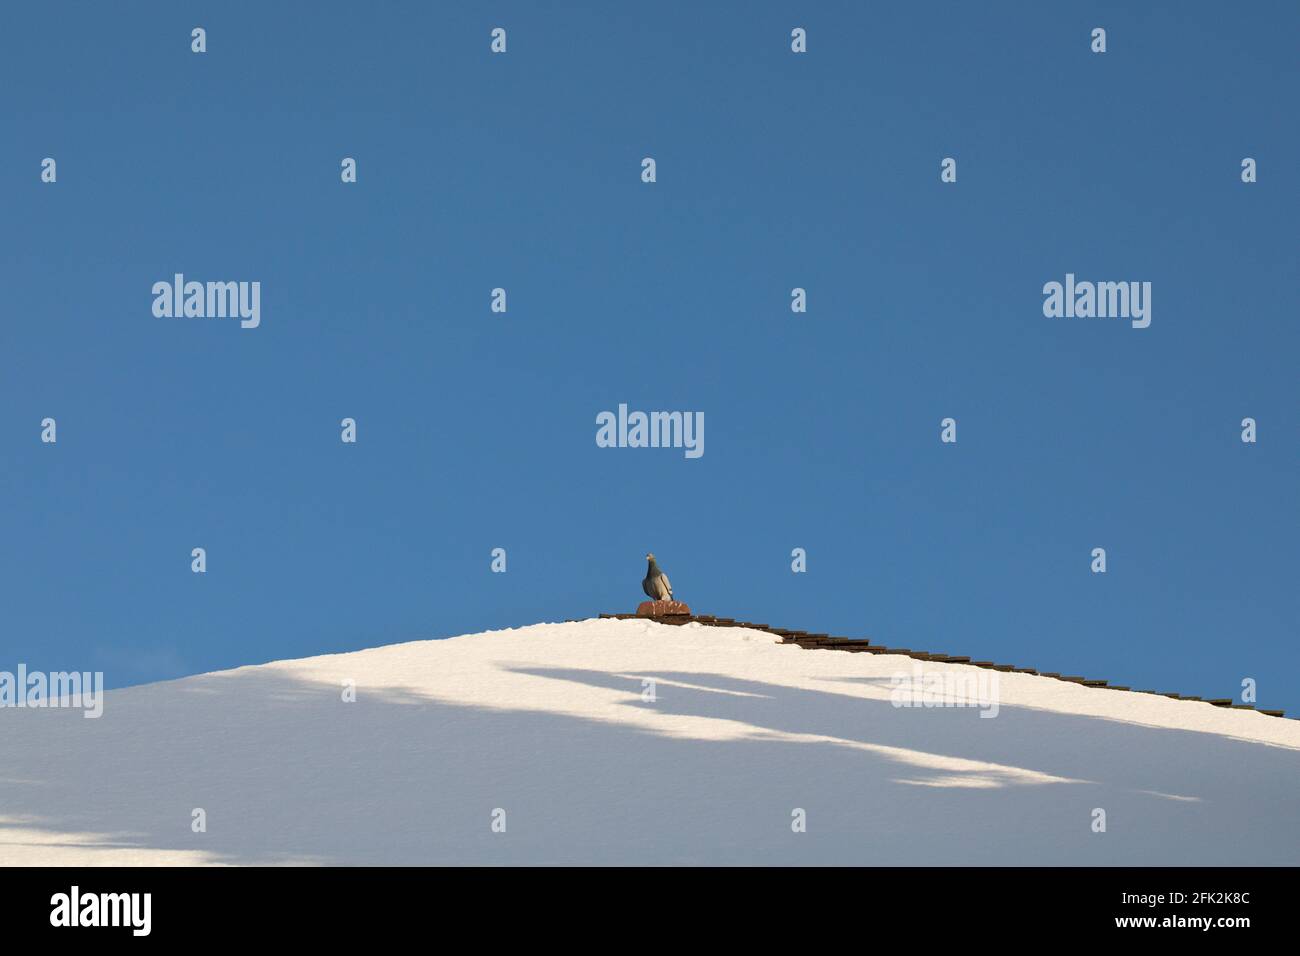 Wood Pigeon on a snow covered roof in winter with clear blue sky, England, United Kingdom Stock Photo